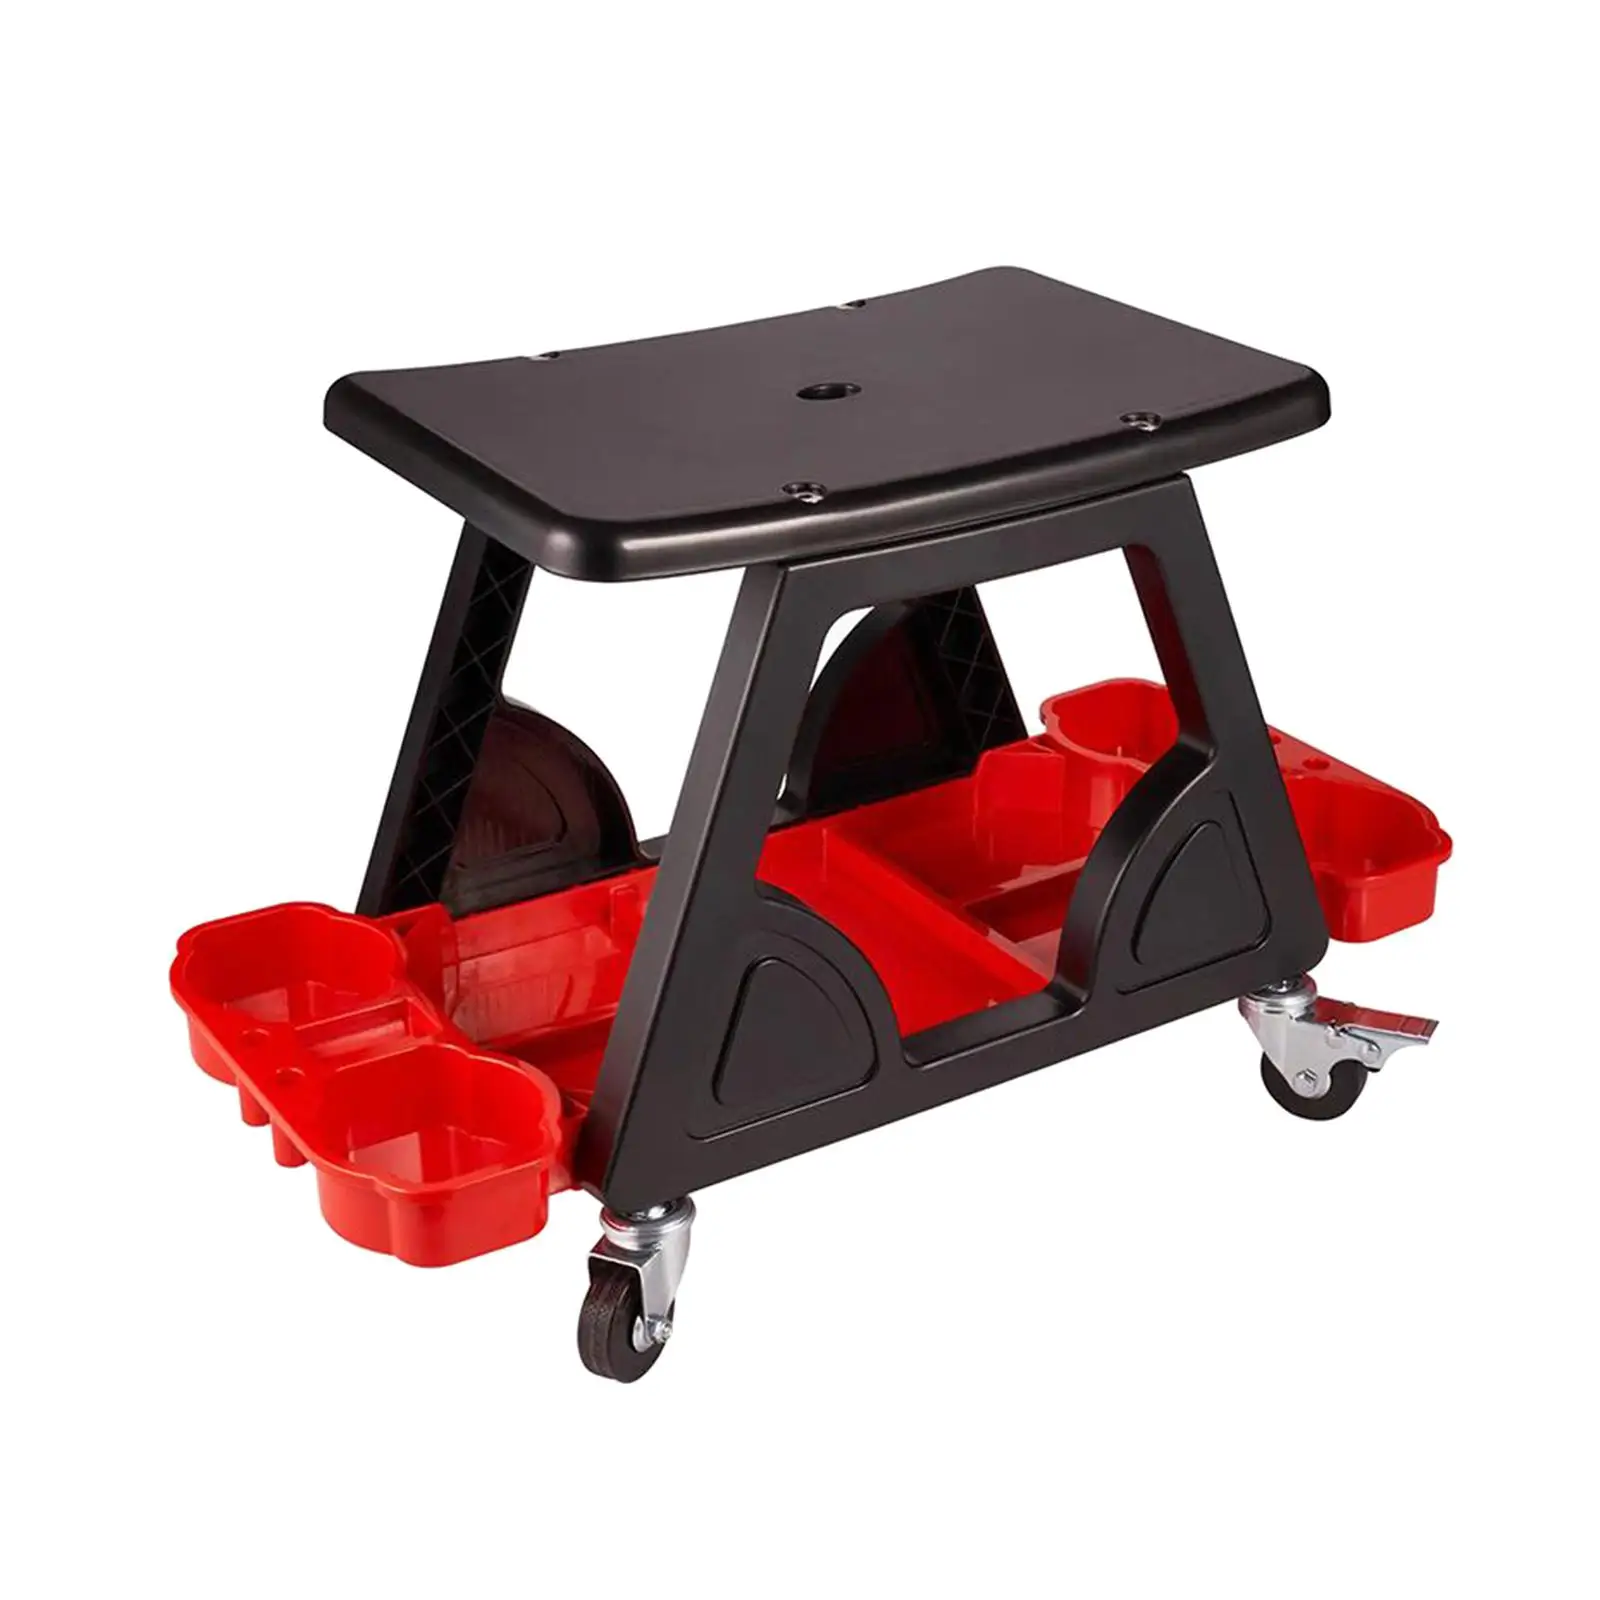 Garage Shop Stool Creeper Car Detailing Stool Auto Work Repair Durable with Tool Storage Tray Roller Seat Mechanic Creeper Seat images - 6